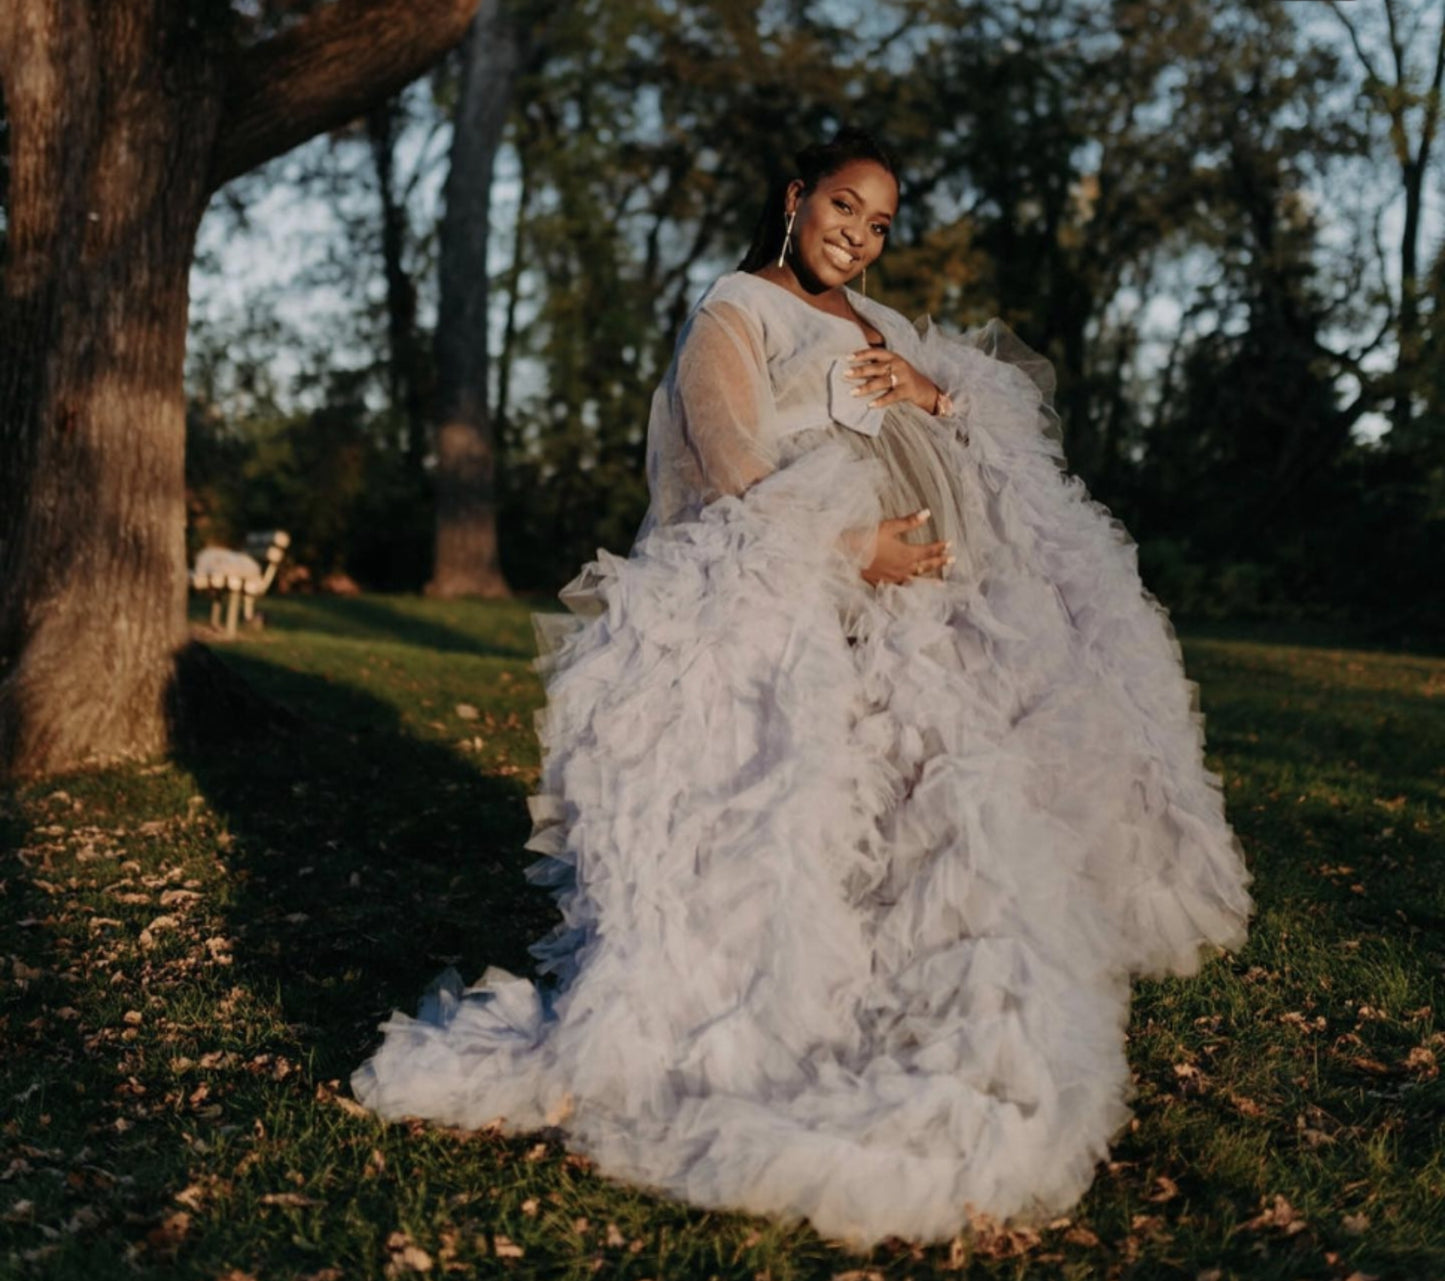 "Blue Ivy" Baby Blue Tulle Maternity Robe Dress For Rent